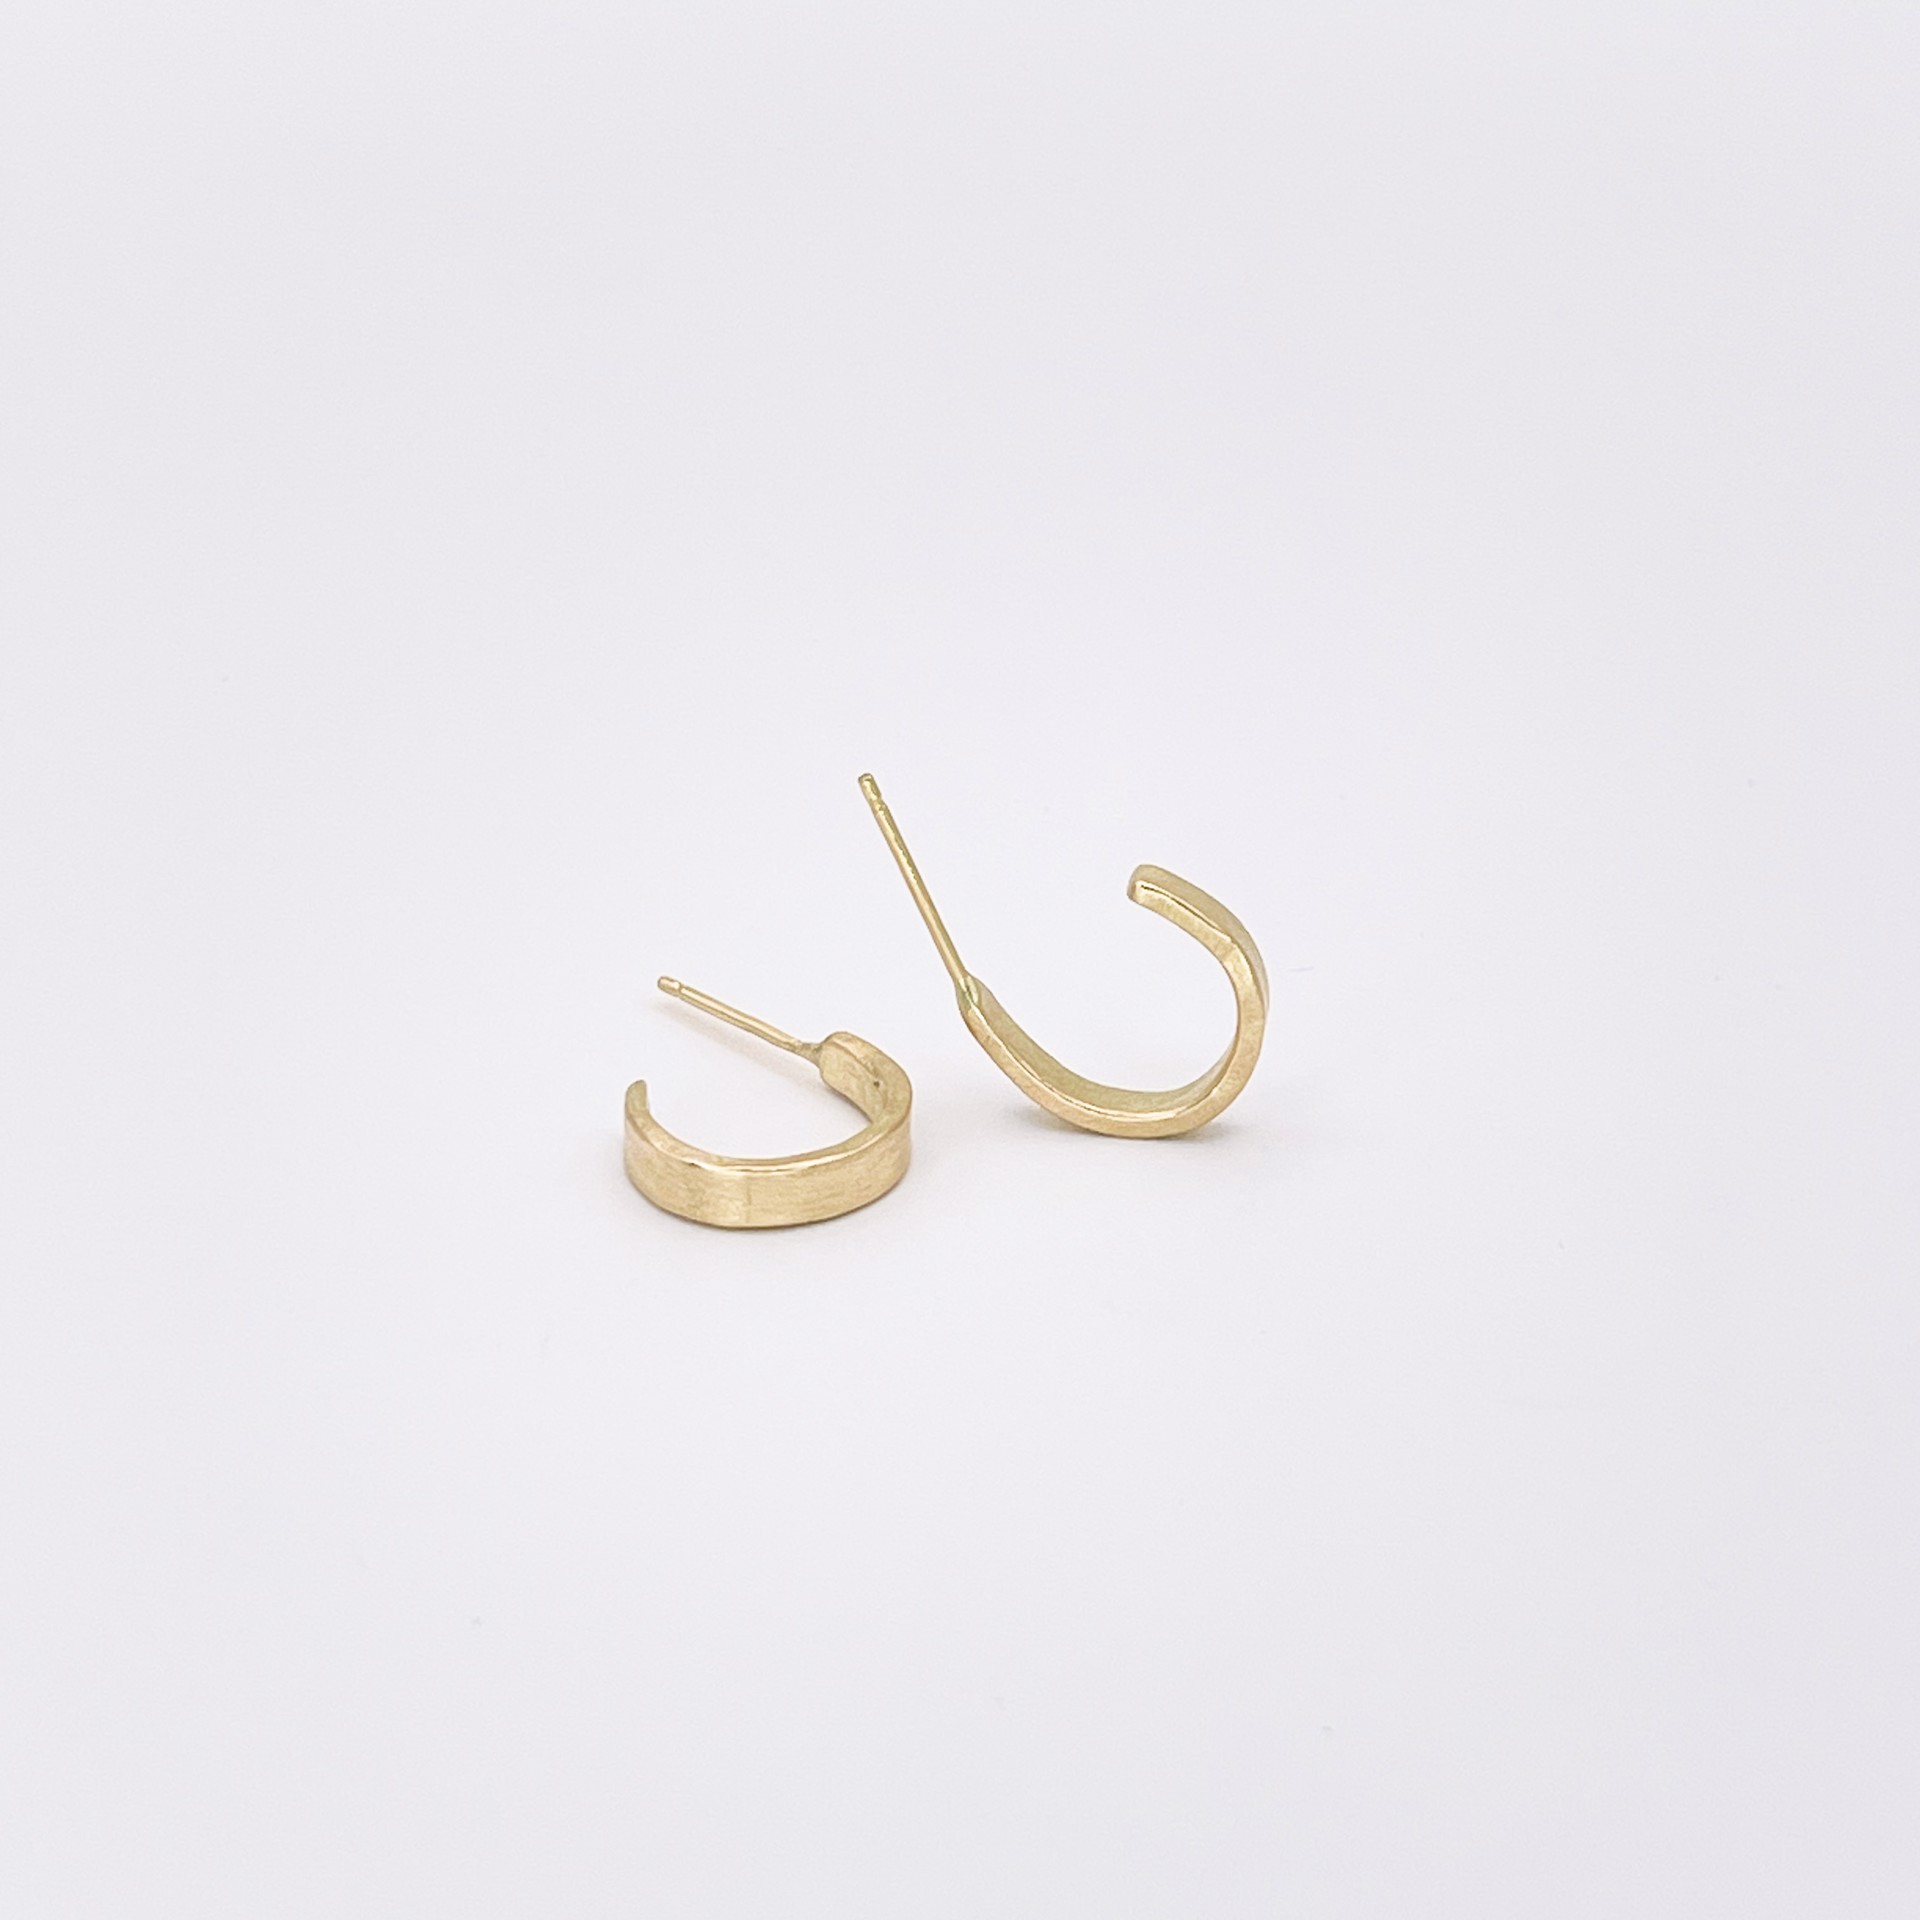 LHE12- 18k gold Small Hand-Hammered Hoop Earrings by Leandra Hill